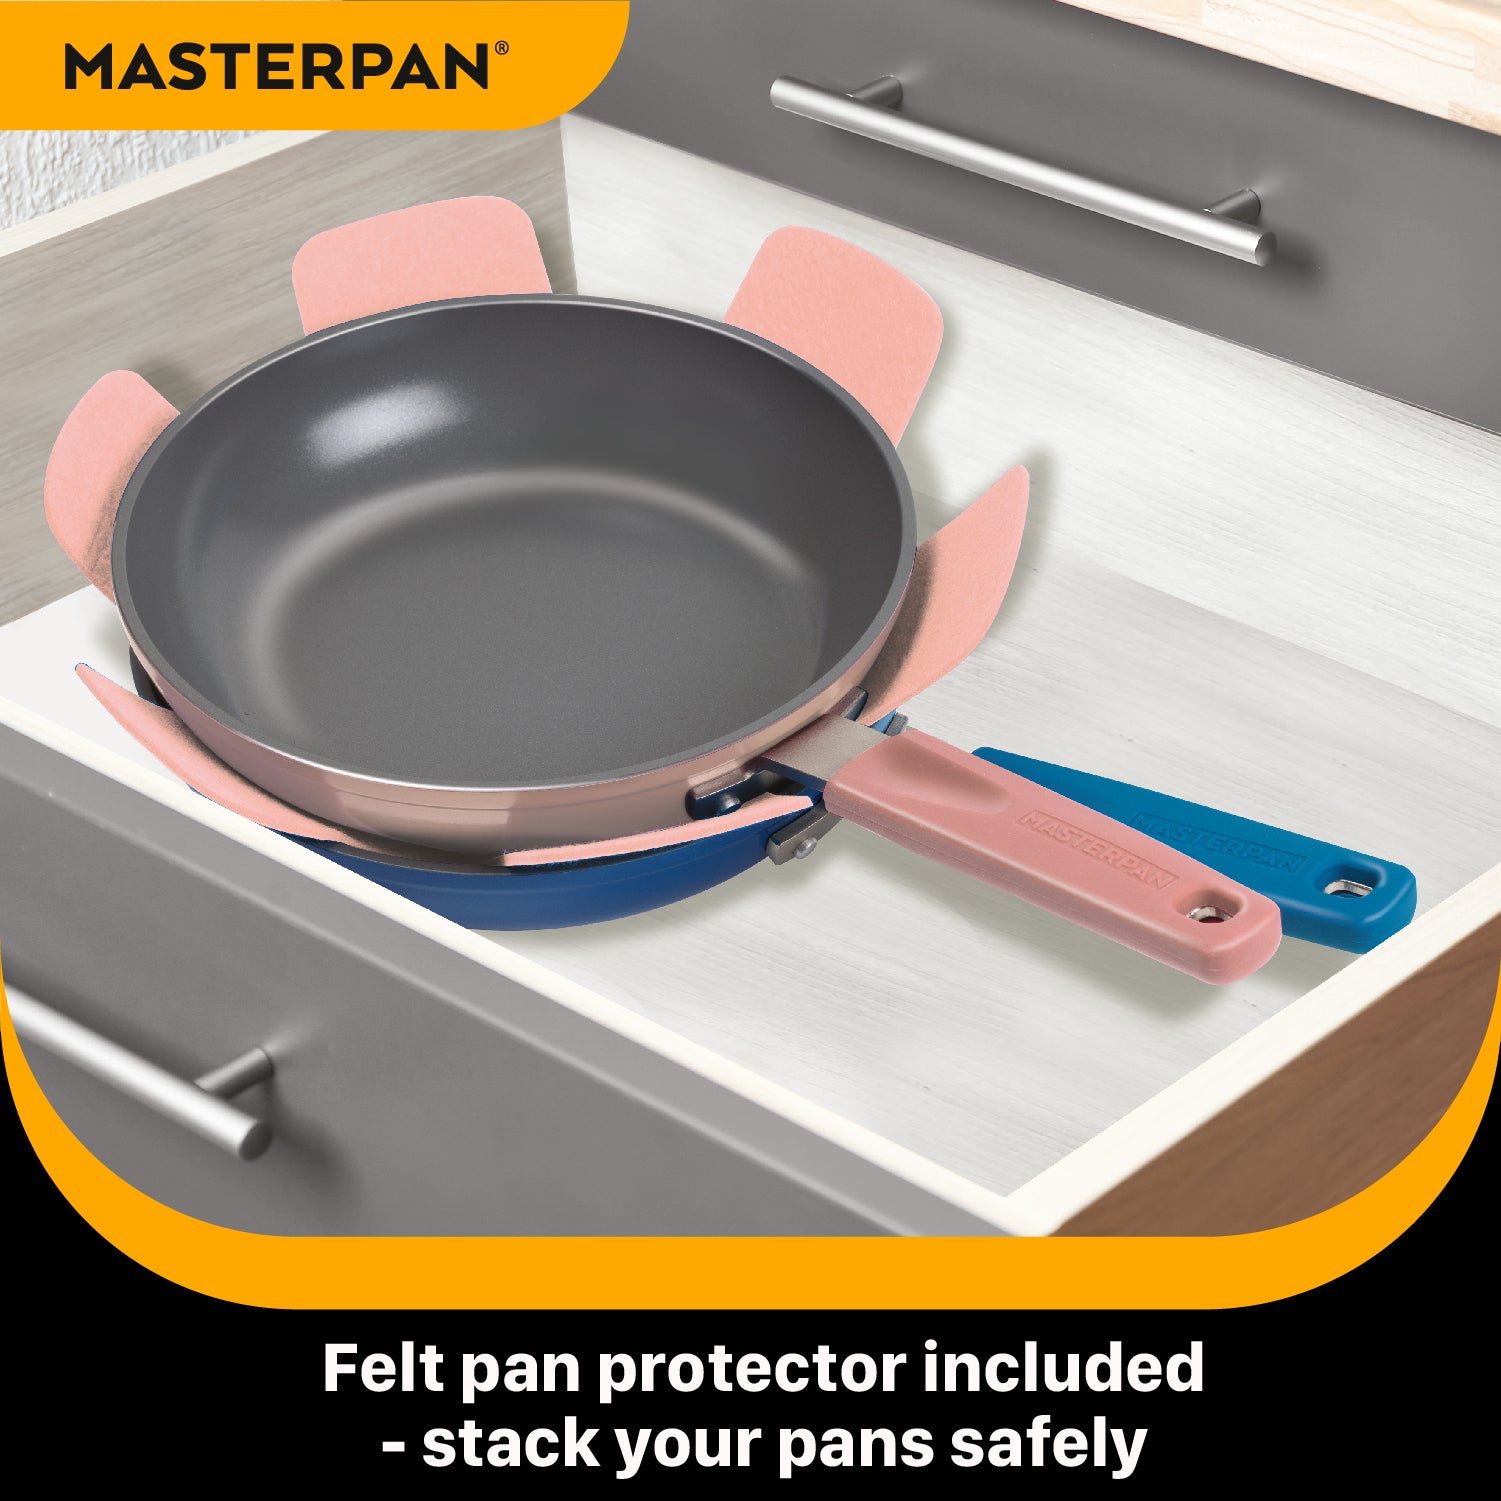 STOVETOP OVEN FRY PAN & SKILLET WITH HEAT-IN STEAM-OUT LID, HEALTHY CERAMIC NON-STICK ALUMINIUM WITH STAINLESS STEEL CHEF’S HANDLE, BONUS 2 UTENSILS AND FELT PAN PROTECTOR INCLUDED, 9.5” (24cm) - CLAY (7612C)